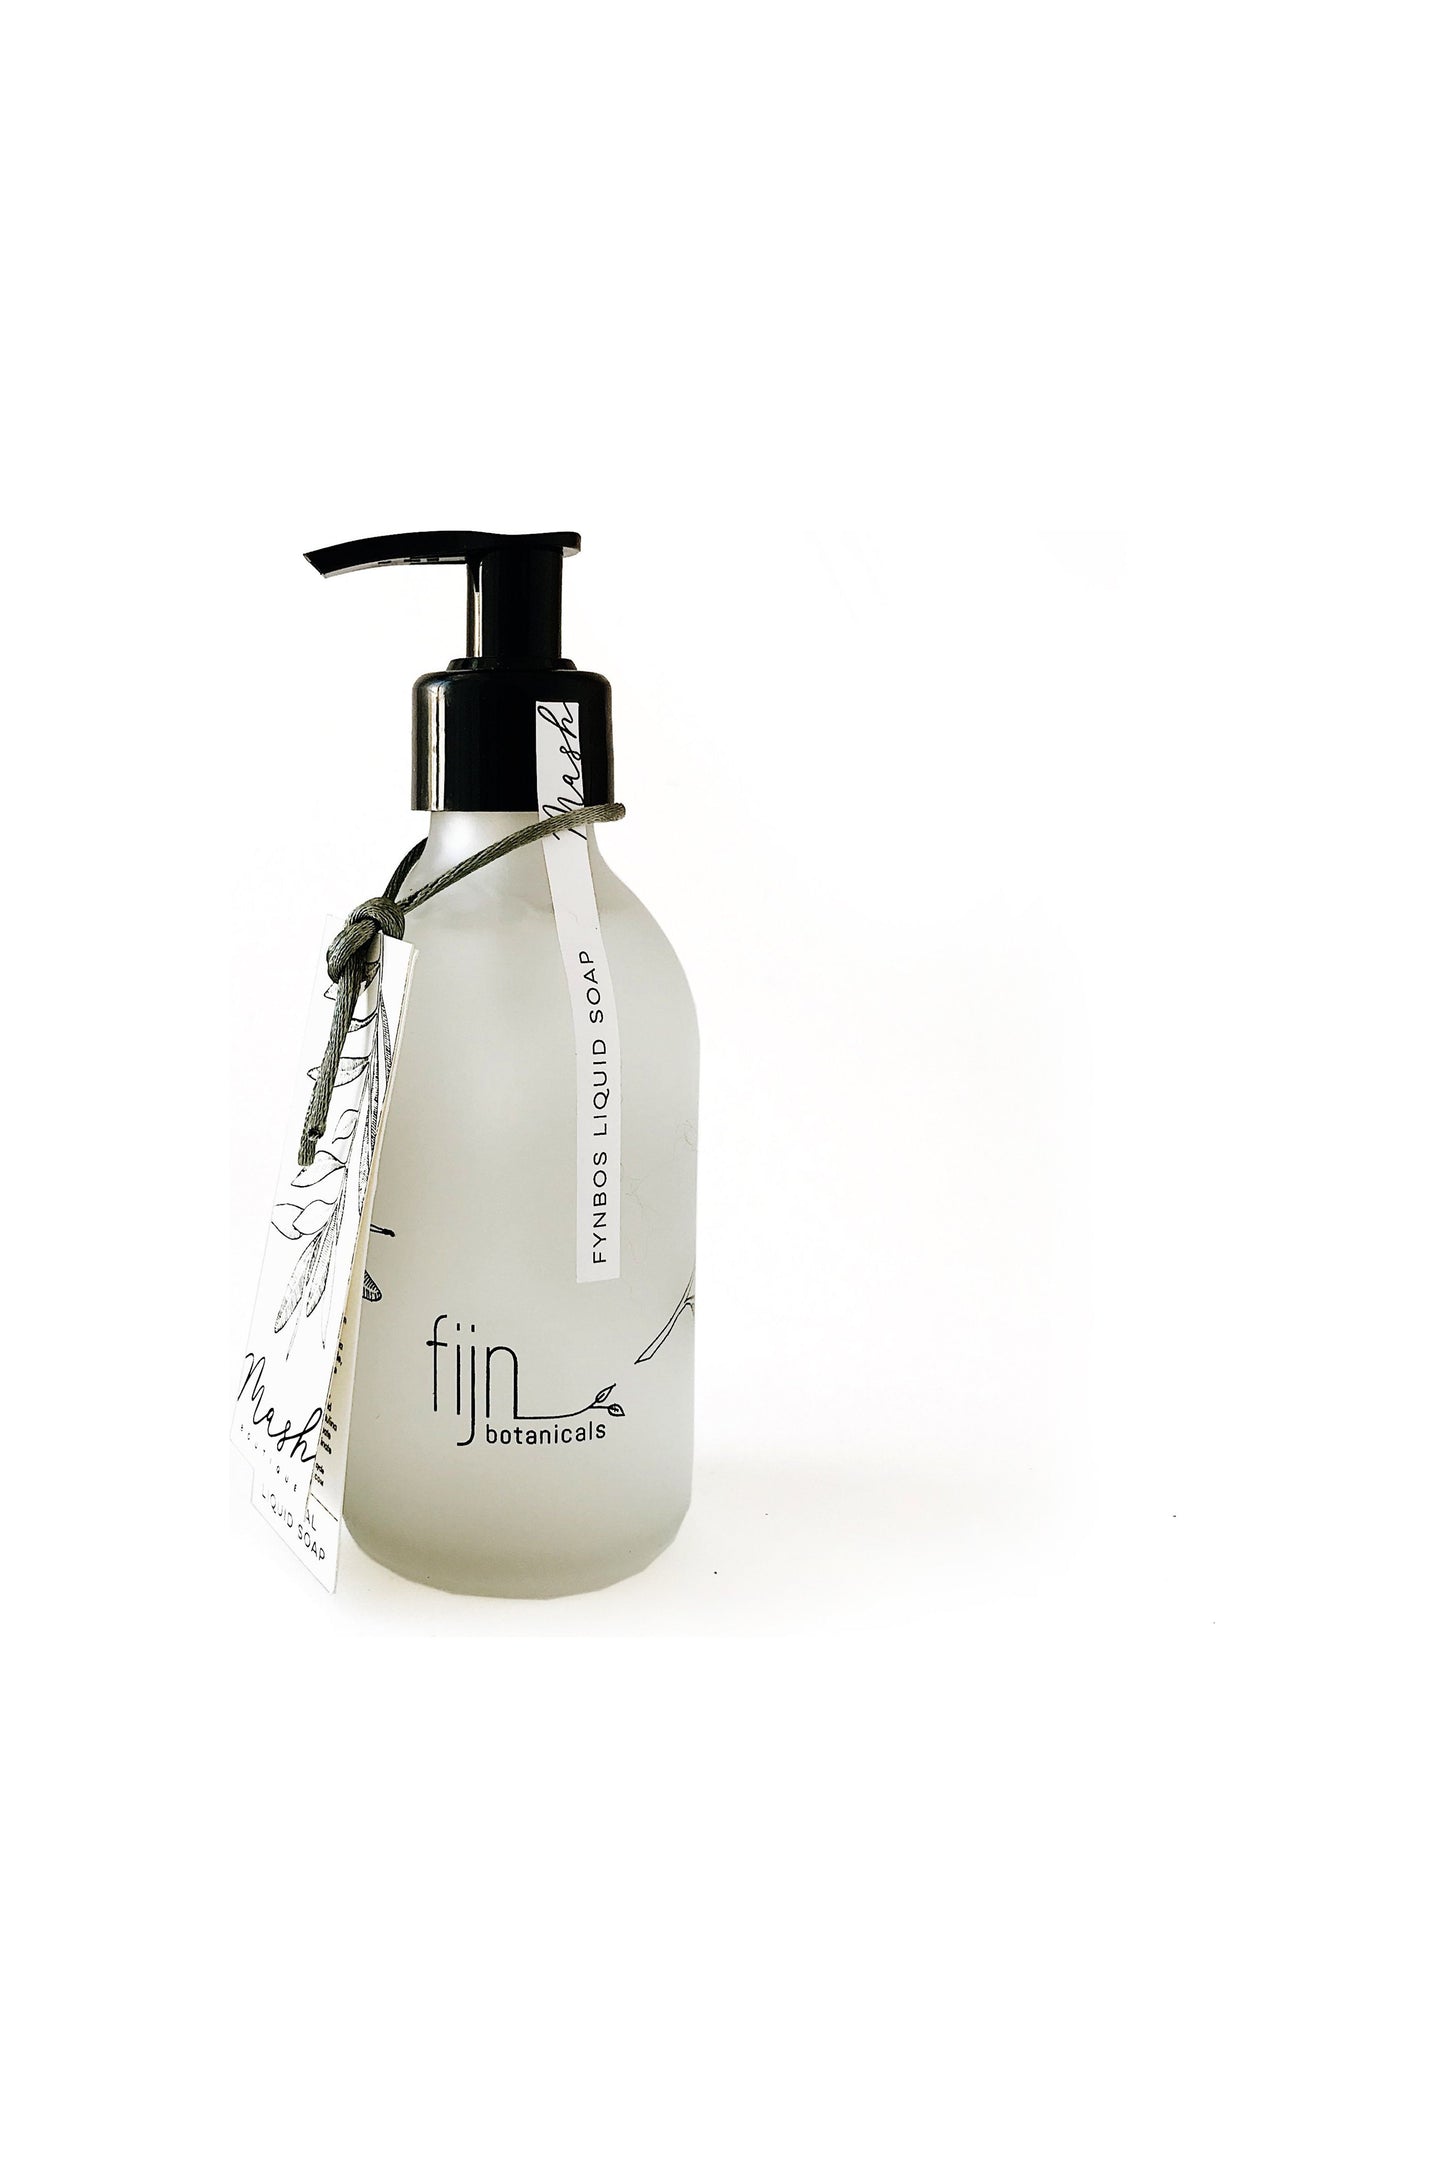 Botanical hand and body lotion